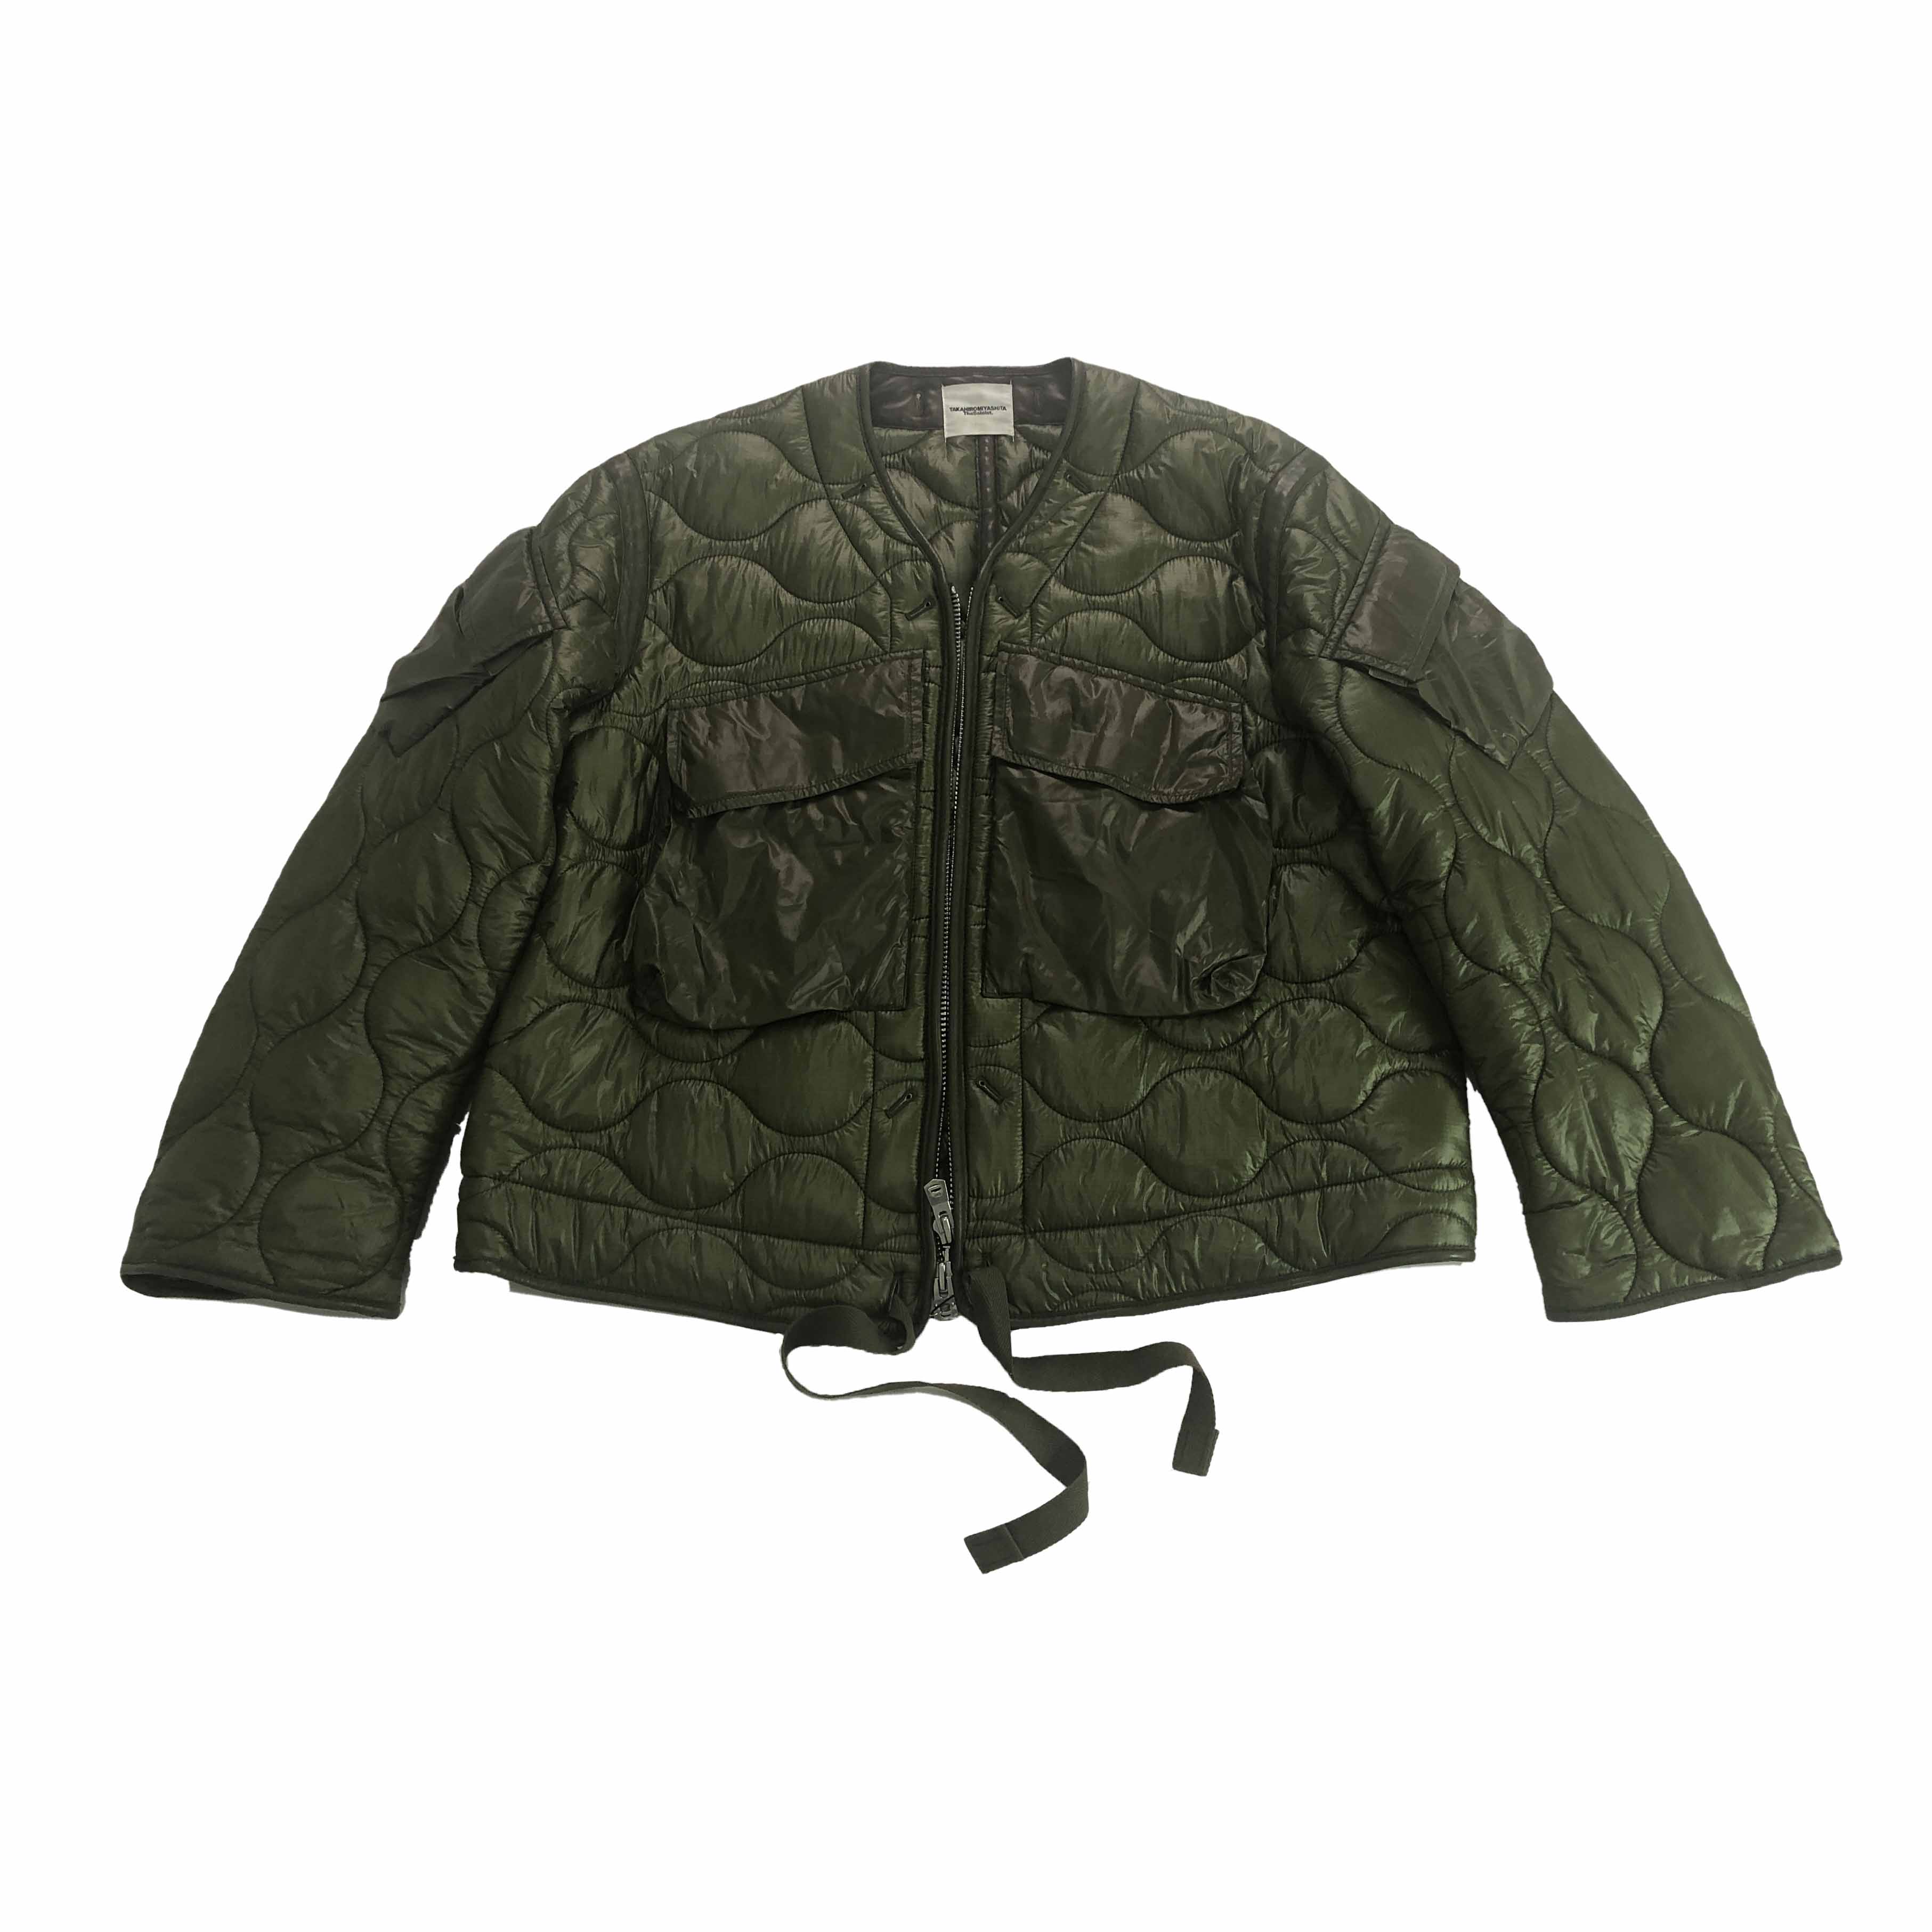 [The Soloist] AW17 Quilted Shell Primaloft Bomber Jacket - Size 46